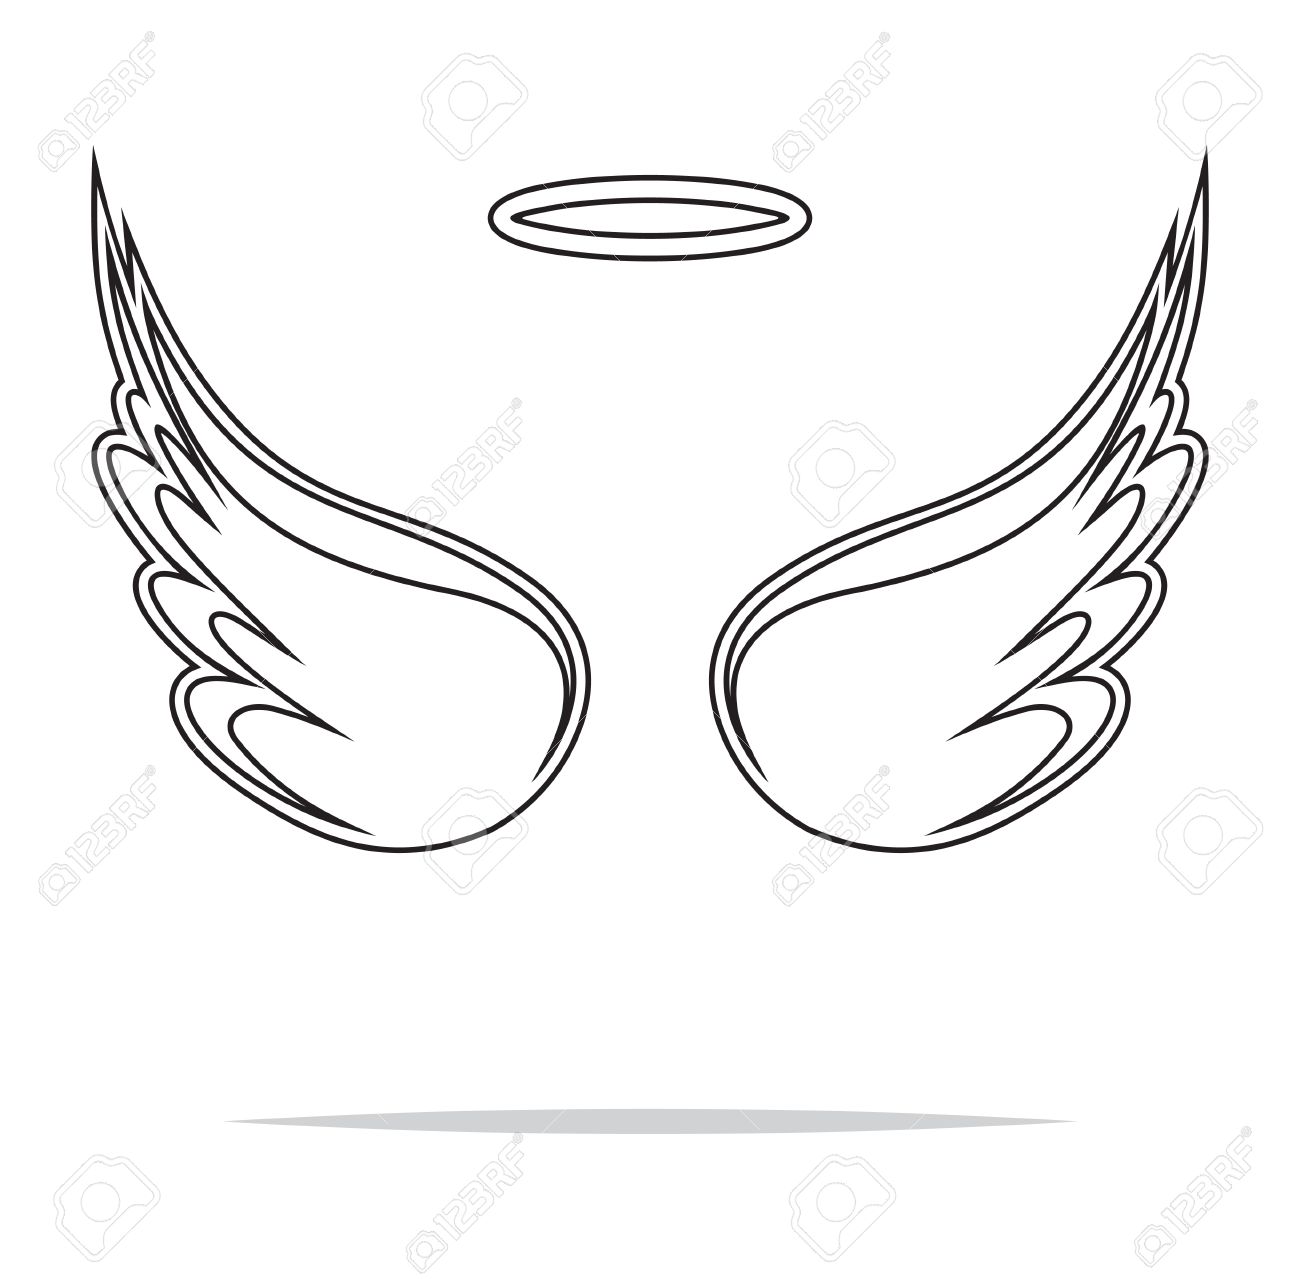 Angel wings clipart free 4 » Clipart Station.